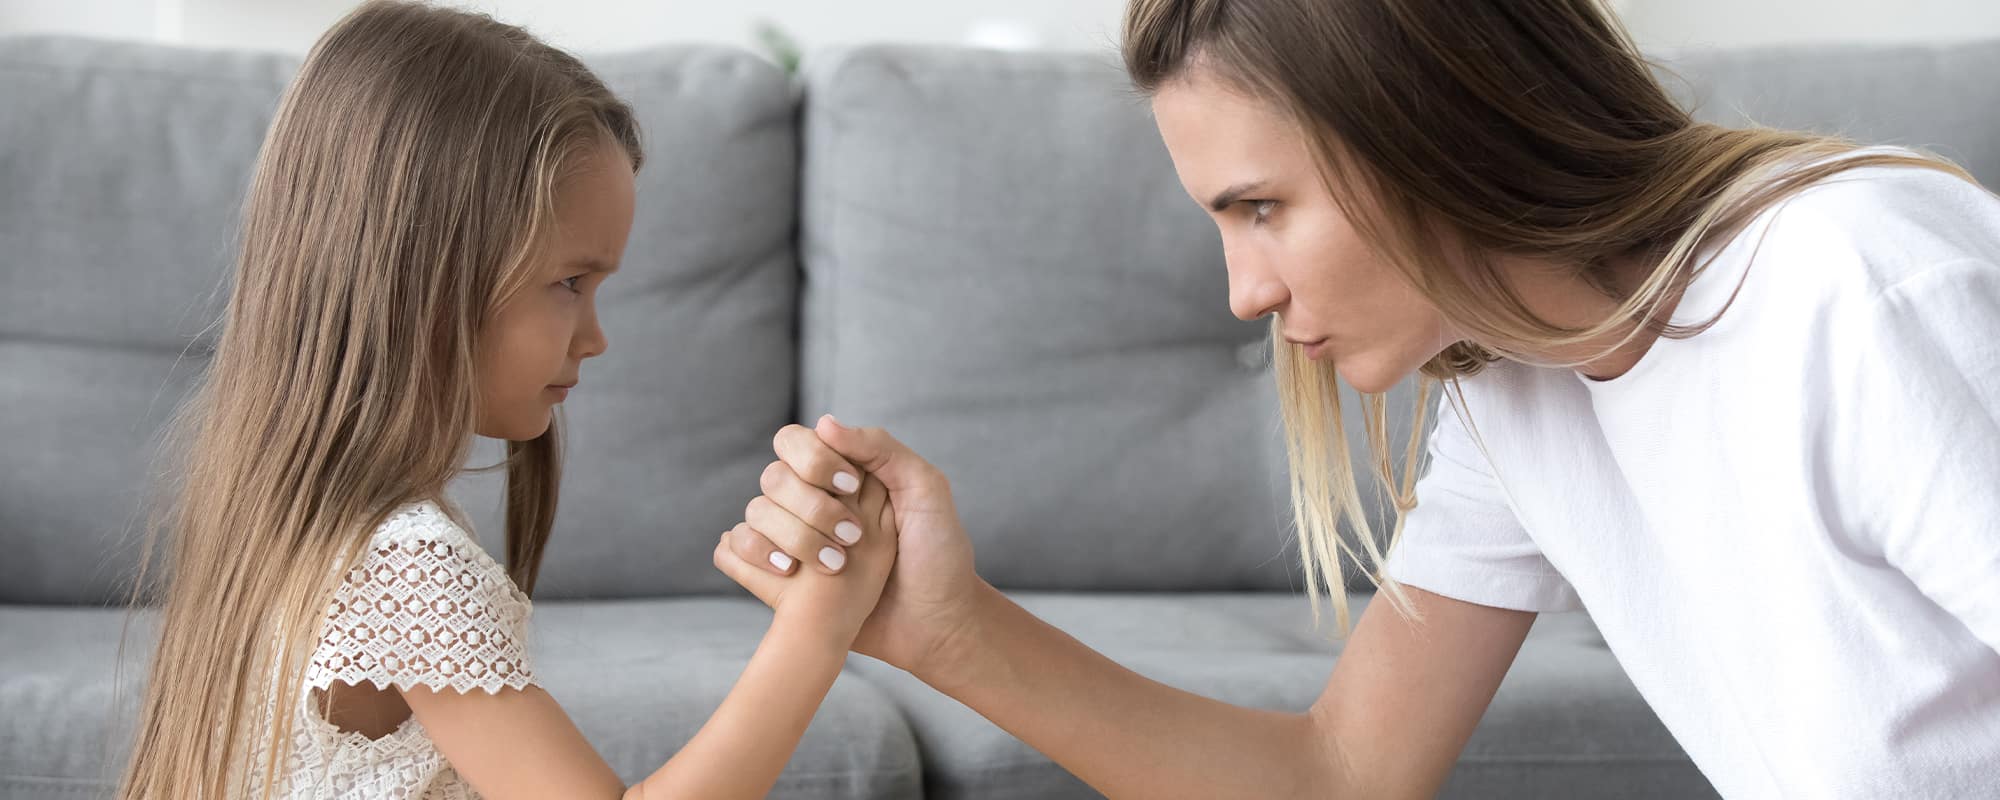 Parenting Power Struggles – Why Our Kids Need Us To Set Limits